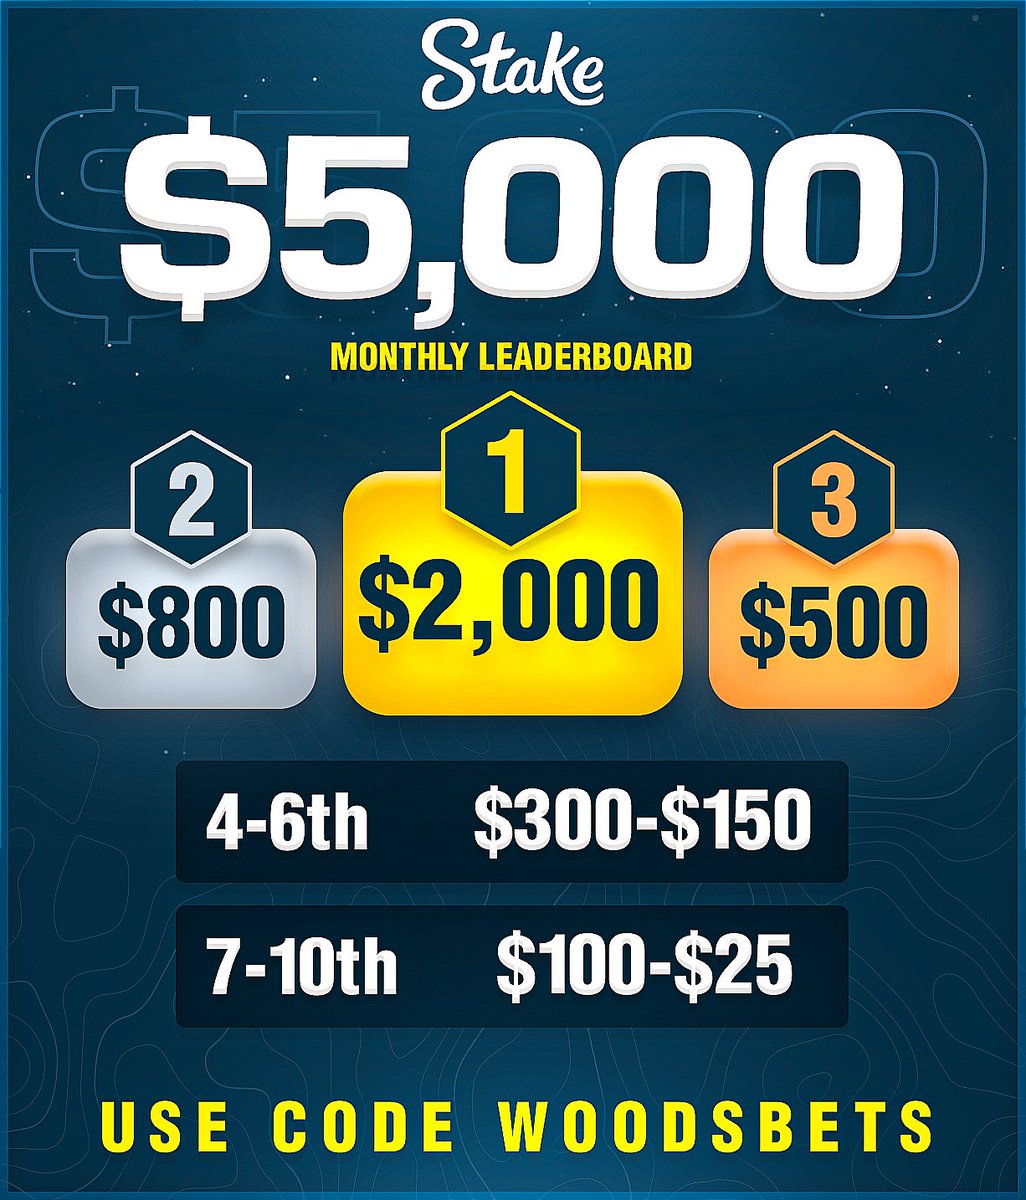 NEW $5,000 MONTHLY LEADERBOARD IS LIVE!

Additional rewards:

• Deposit $100 - Receive $10 
• Deposit $250 - Receive $30
• Deposit $500 - Receive $70
• 200% Bonus on your first deposit ($100-$1000)
• 5% Rakeback on every bet you place

♻️ $25 to a random RT in 24 hours.